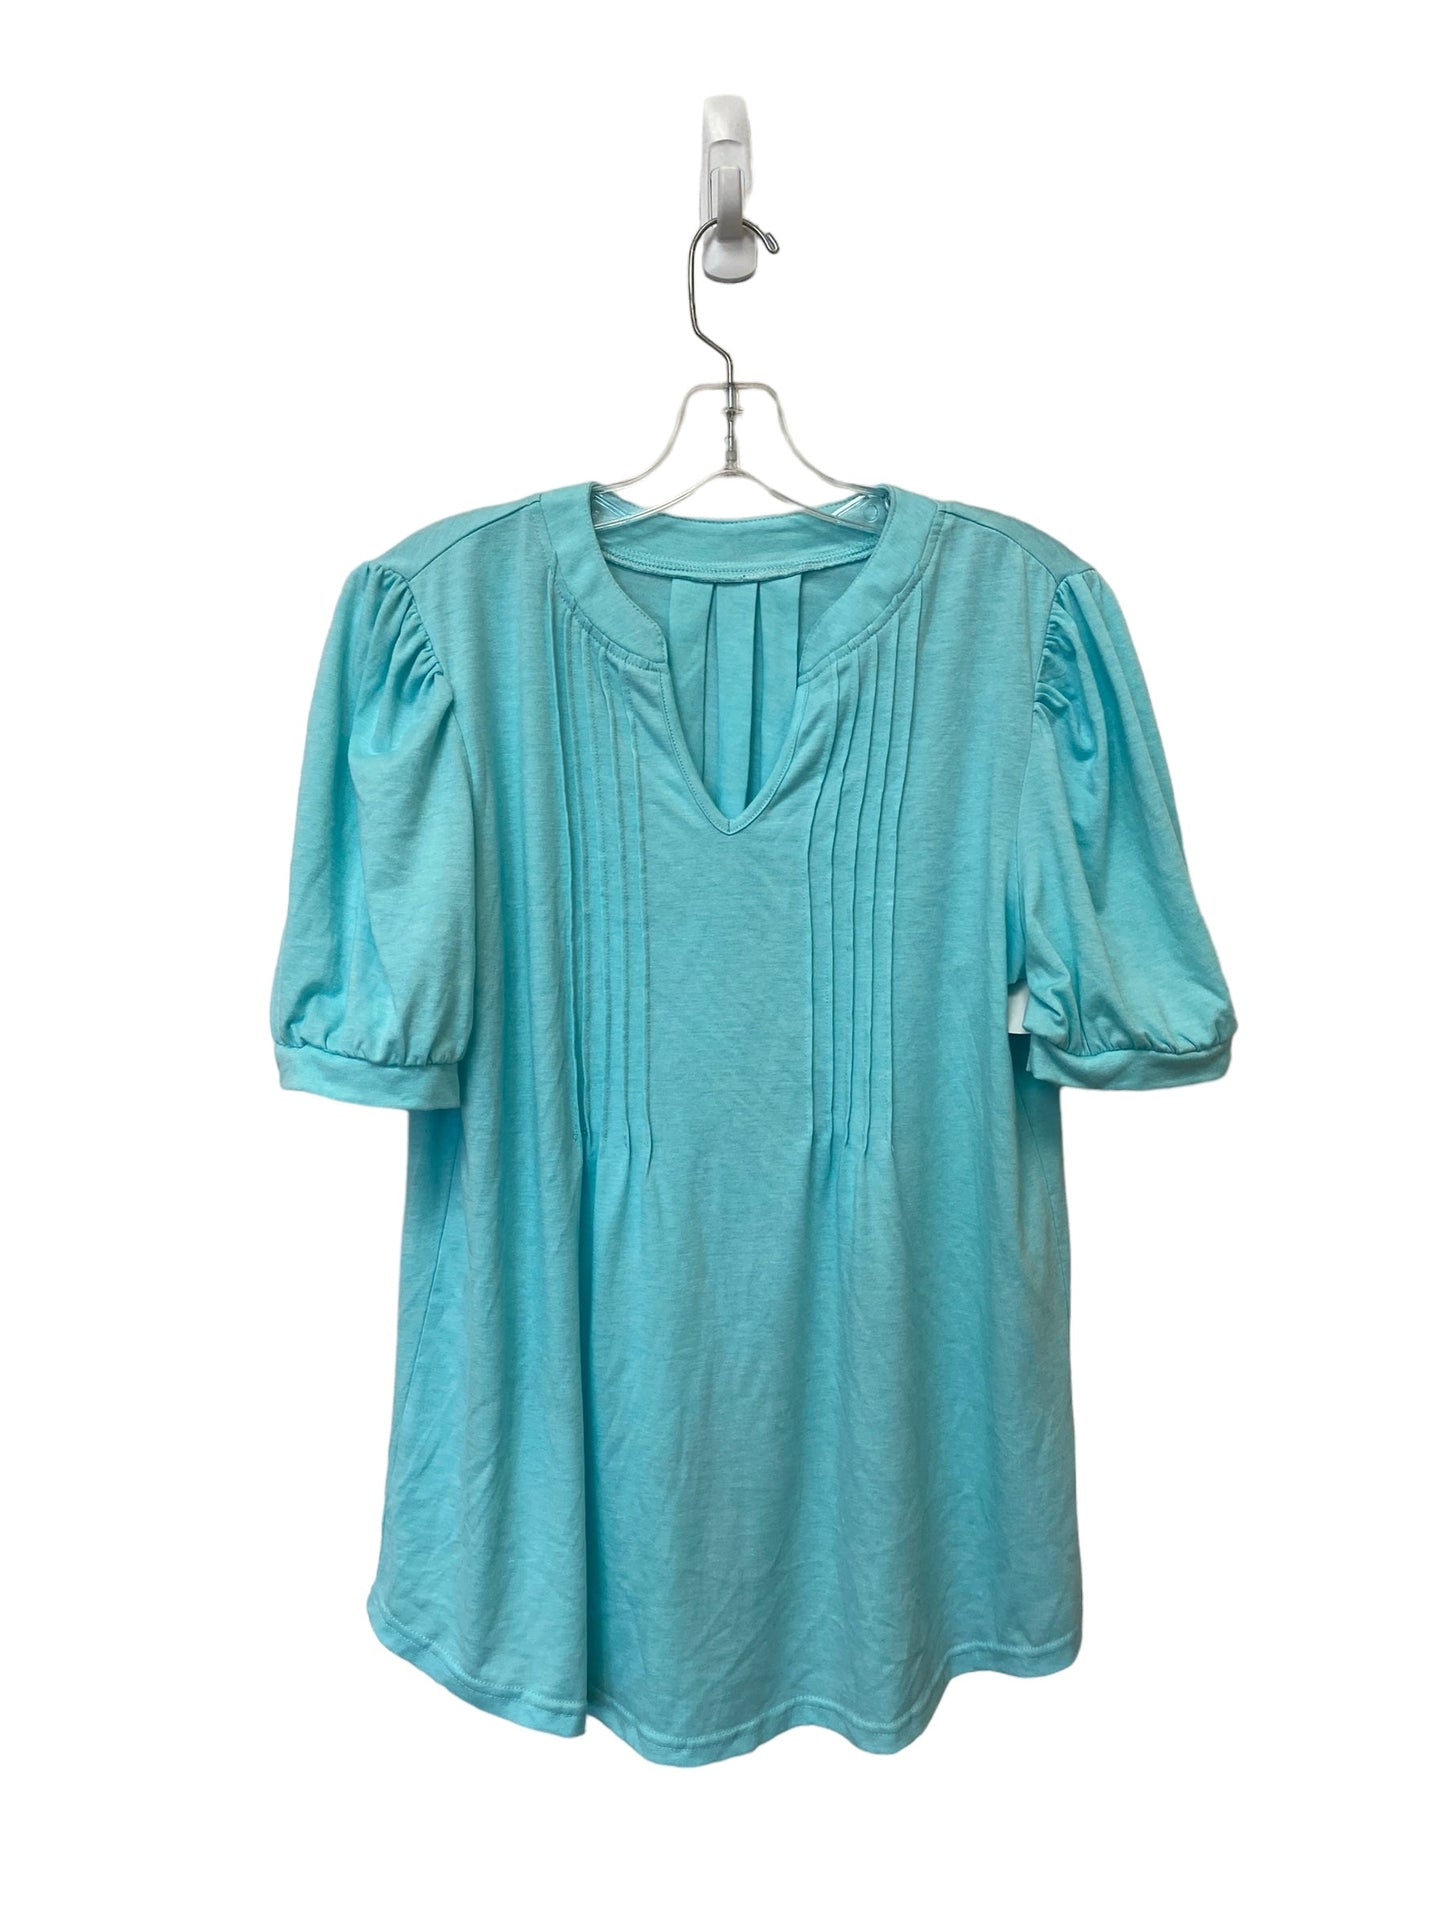 Blue Top Short Sleeve Basic Clothes Mentor, Size M